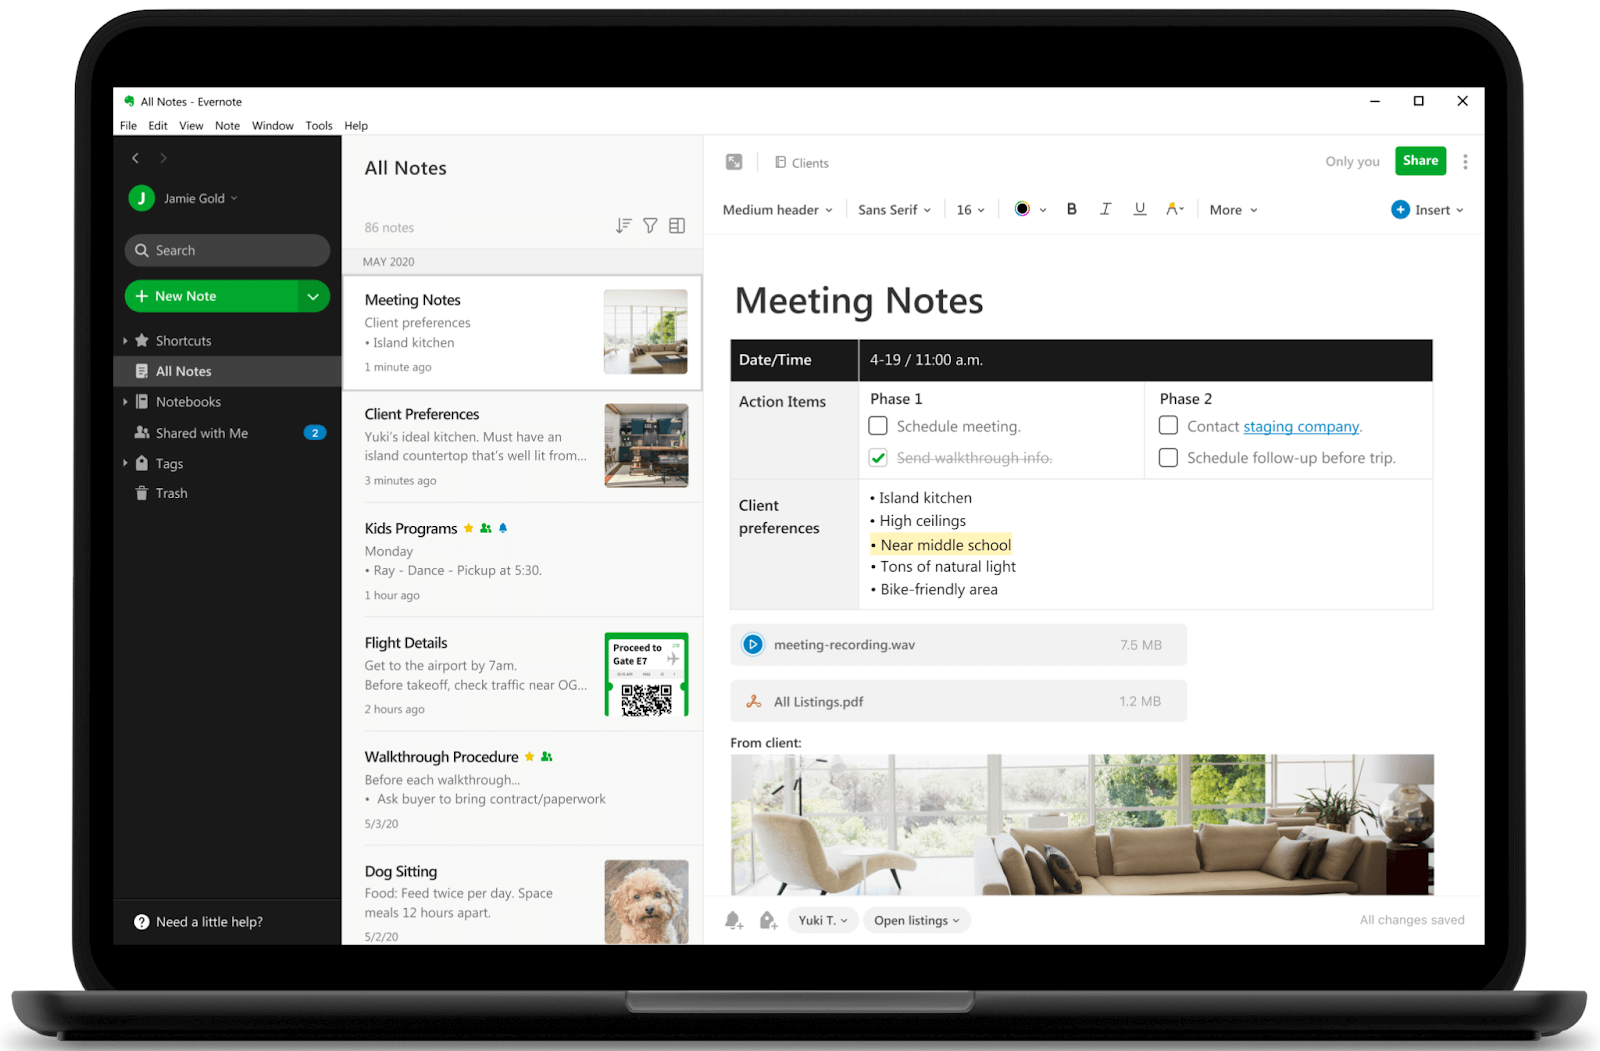 Interface of Evernote